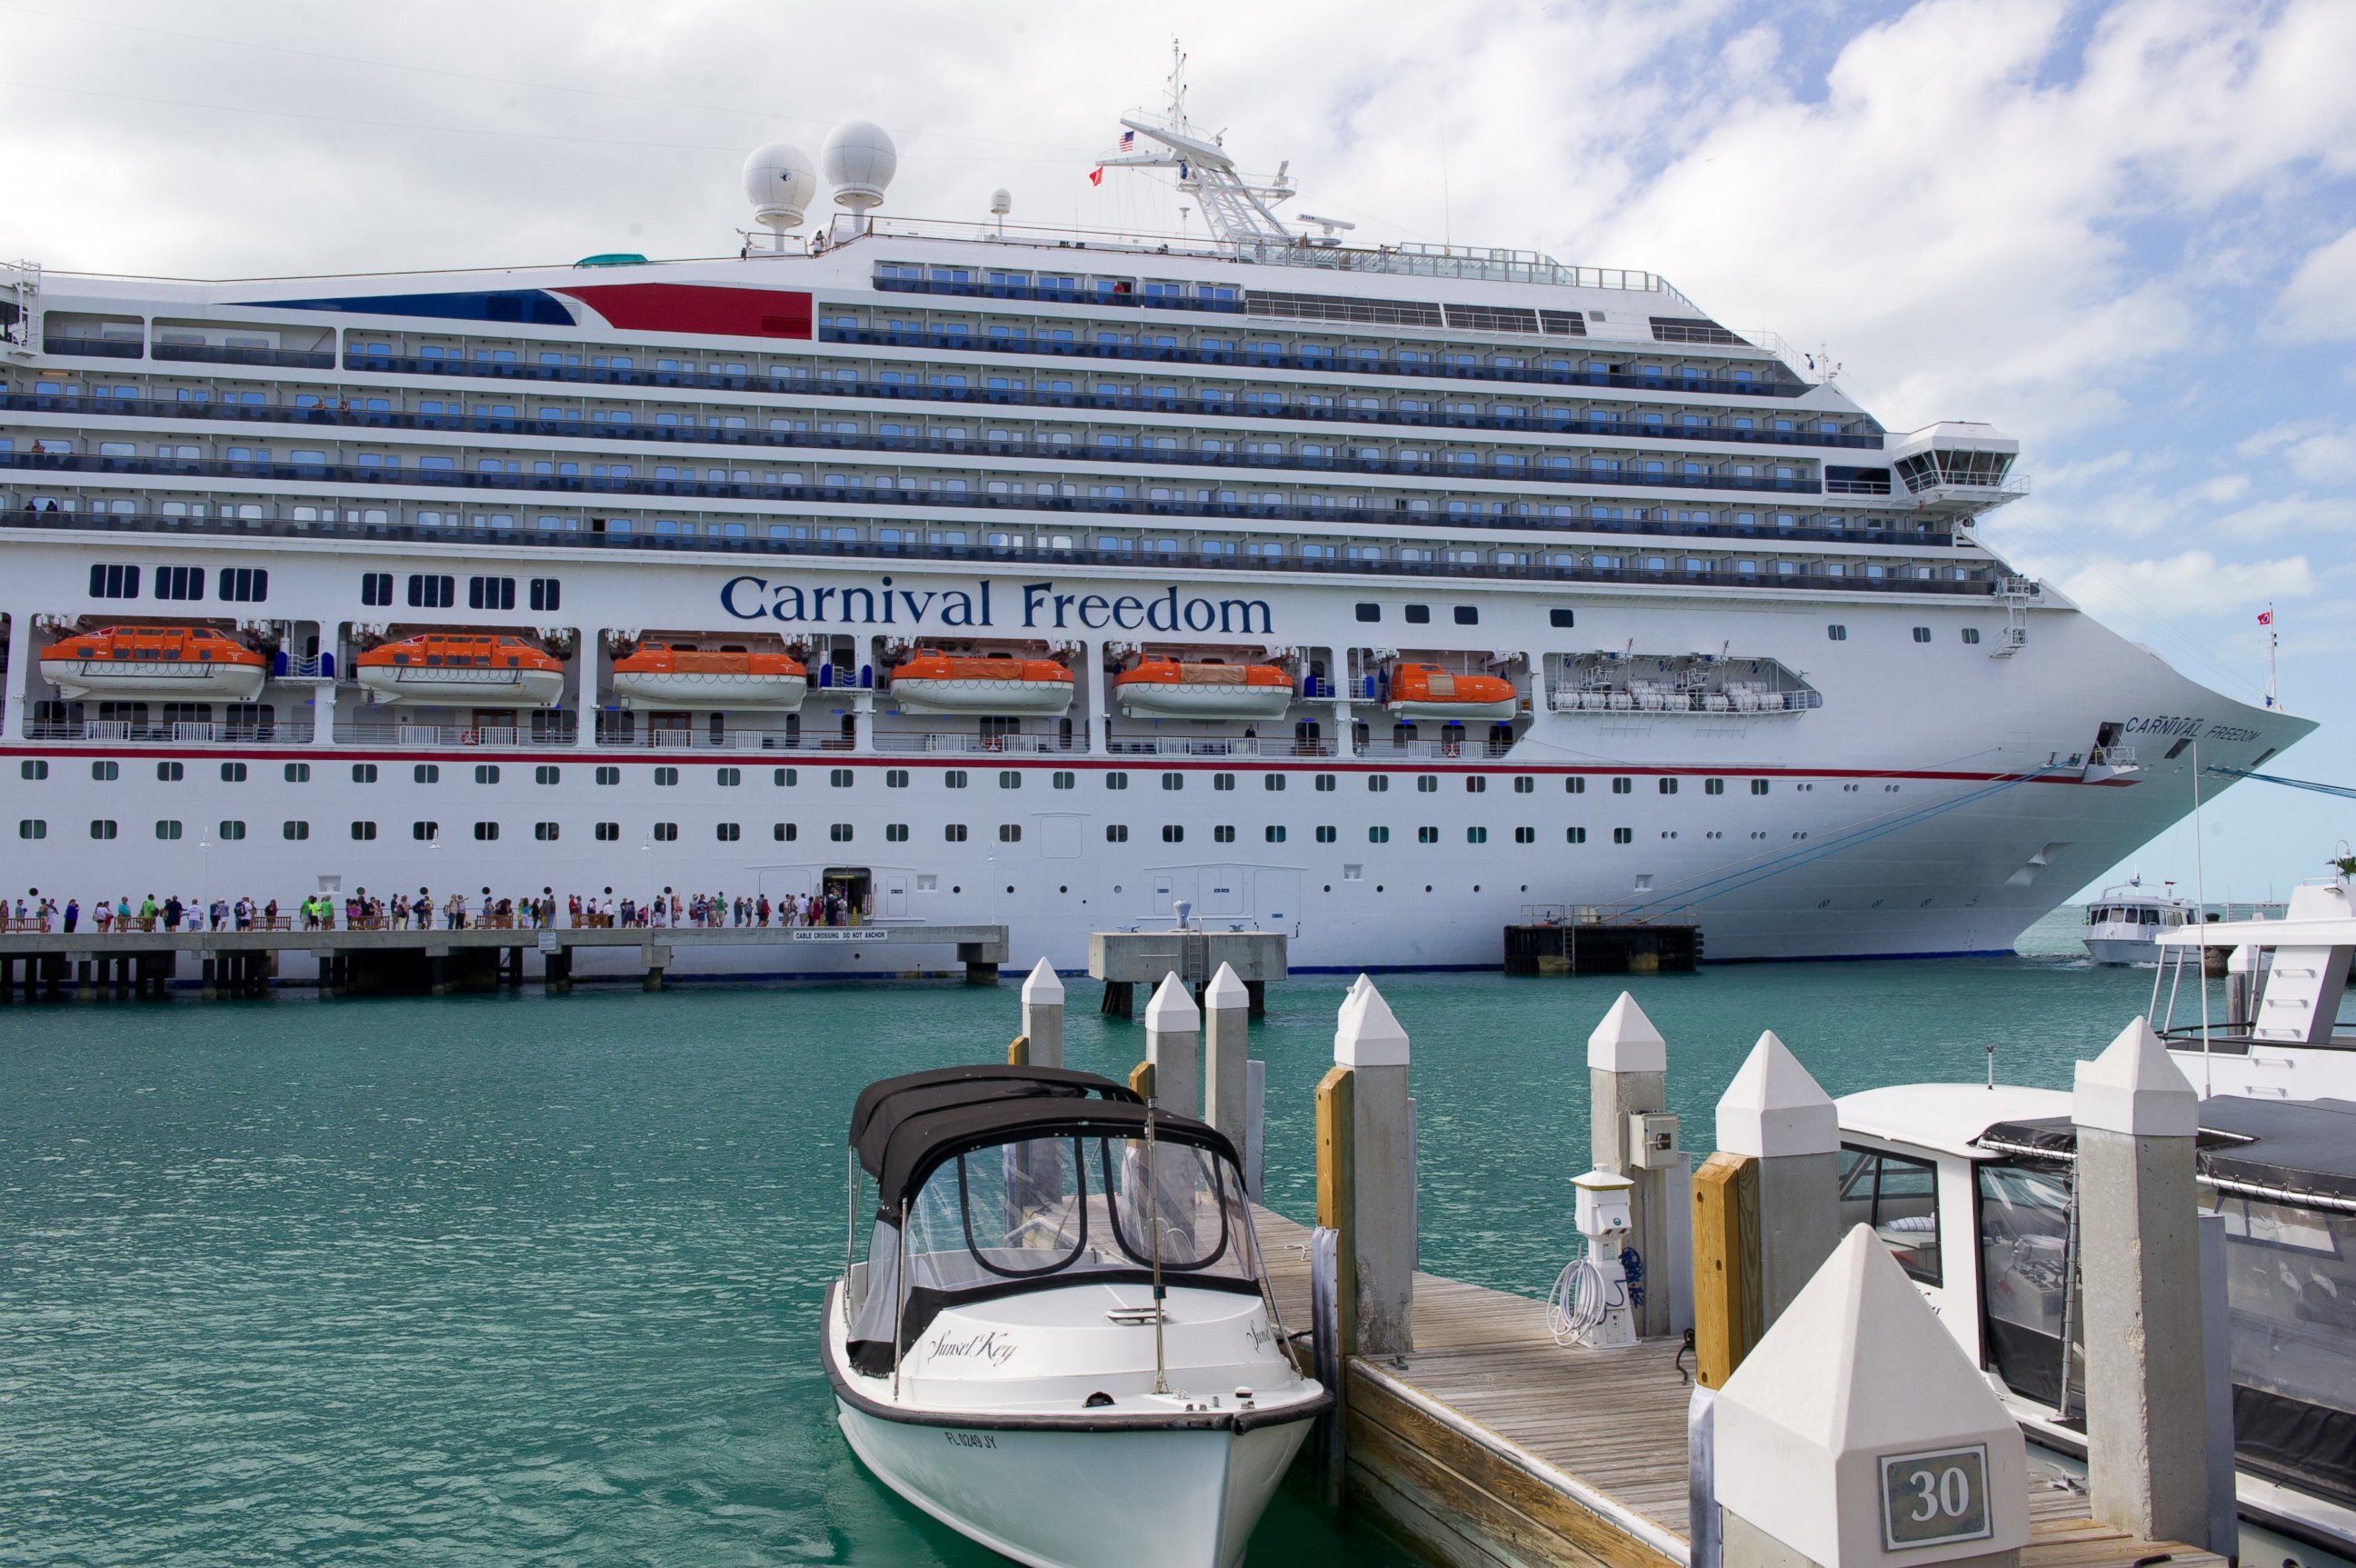 PHOTO: A Carnival Freedom cruise ship is seen in Key West, Florida in this undated file photo.